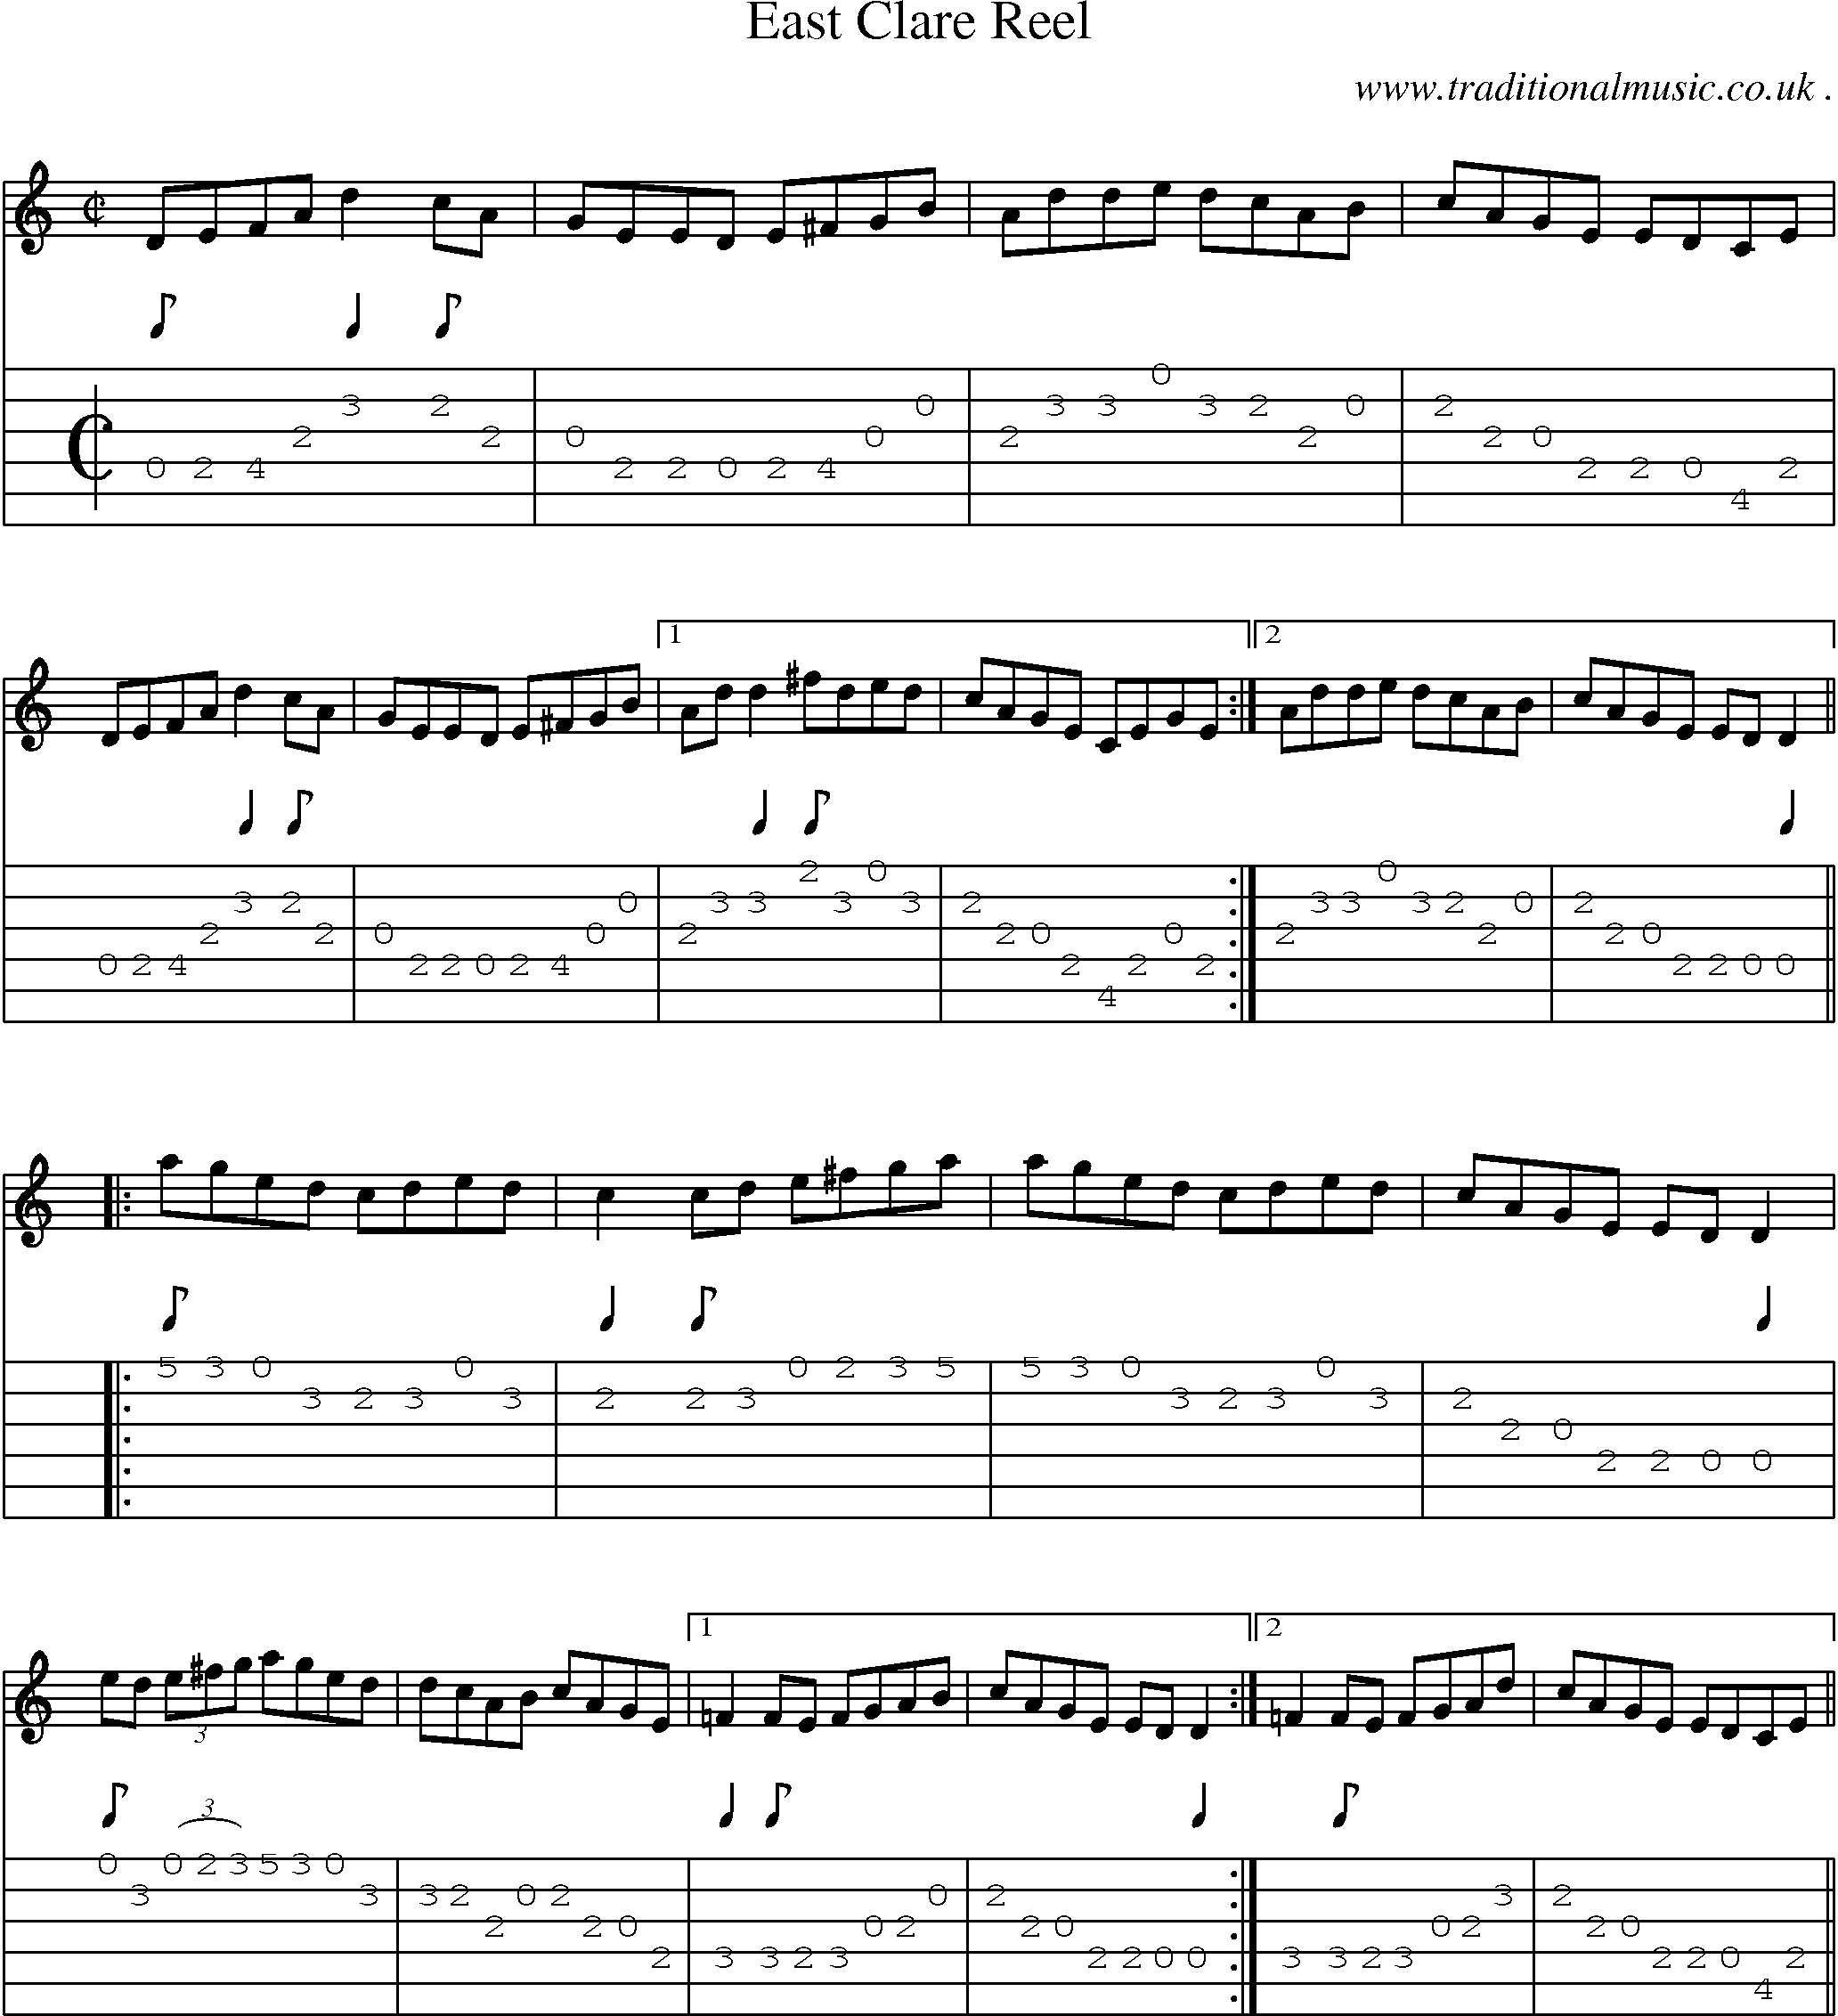 Sheet-Music and Guitar Tabs for East Clare Reel